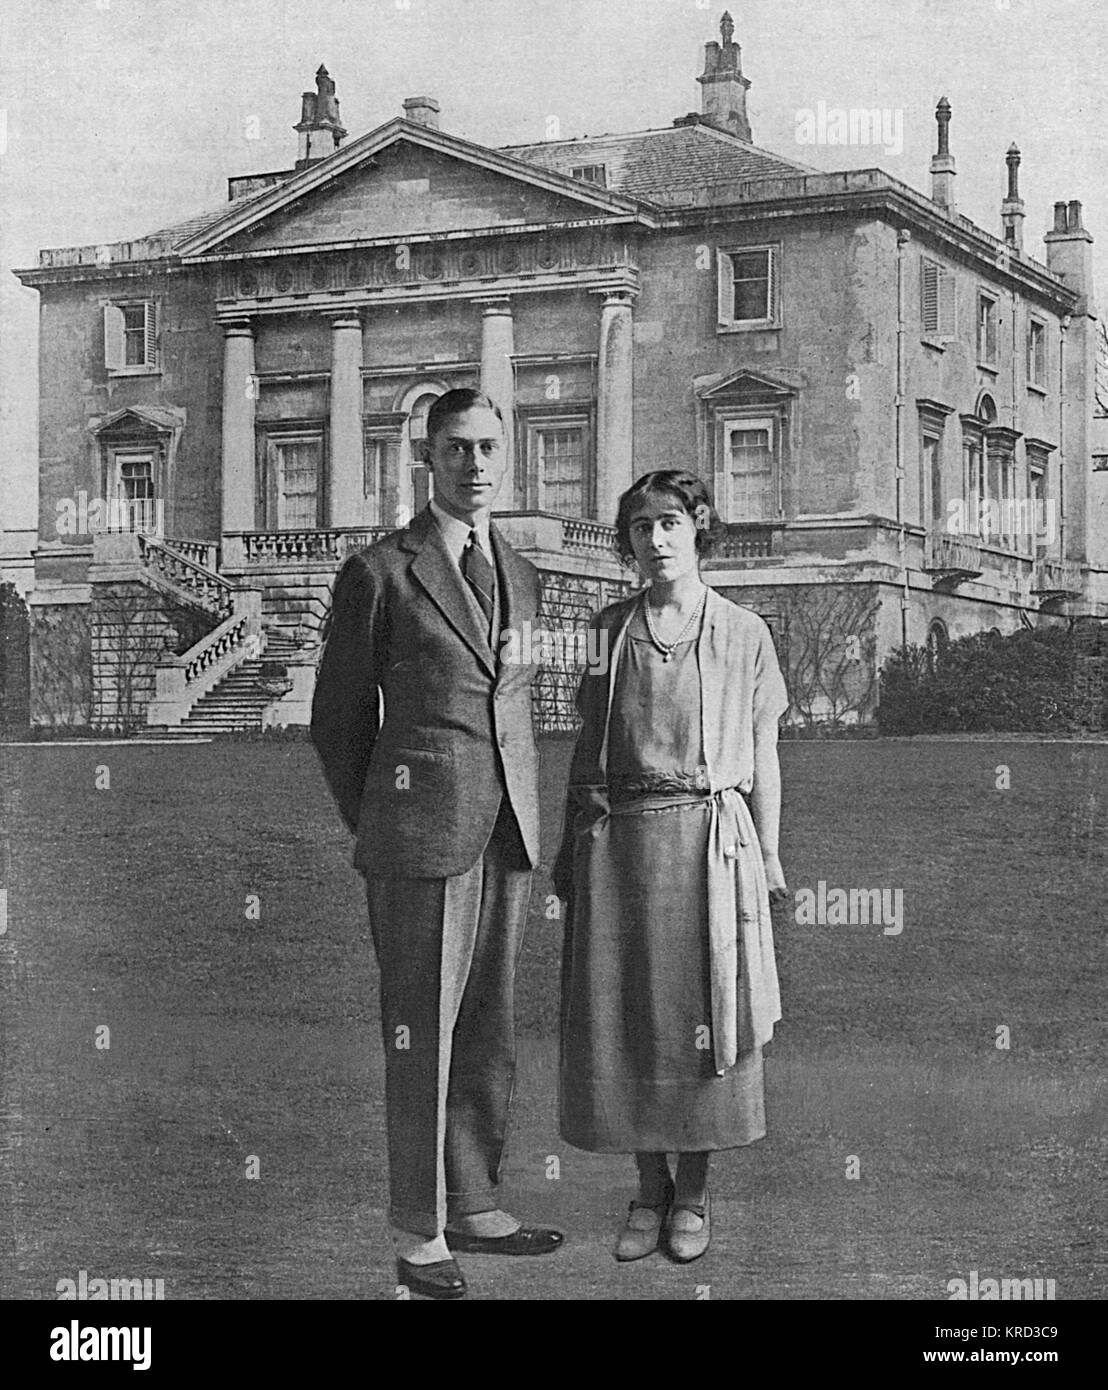 The Duke and Duchess of York, the future King George VI and Queen Elizabeth (the Queen Mother), pictured superimposed in front of White Lodge in Richmond Great Park, their first home following their marriage in April 1923.       Date: 1923 Stock Photo